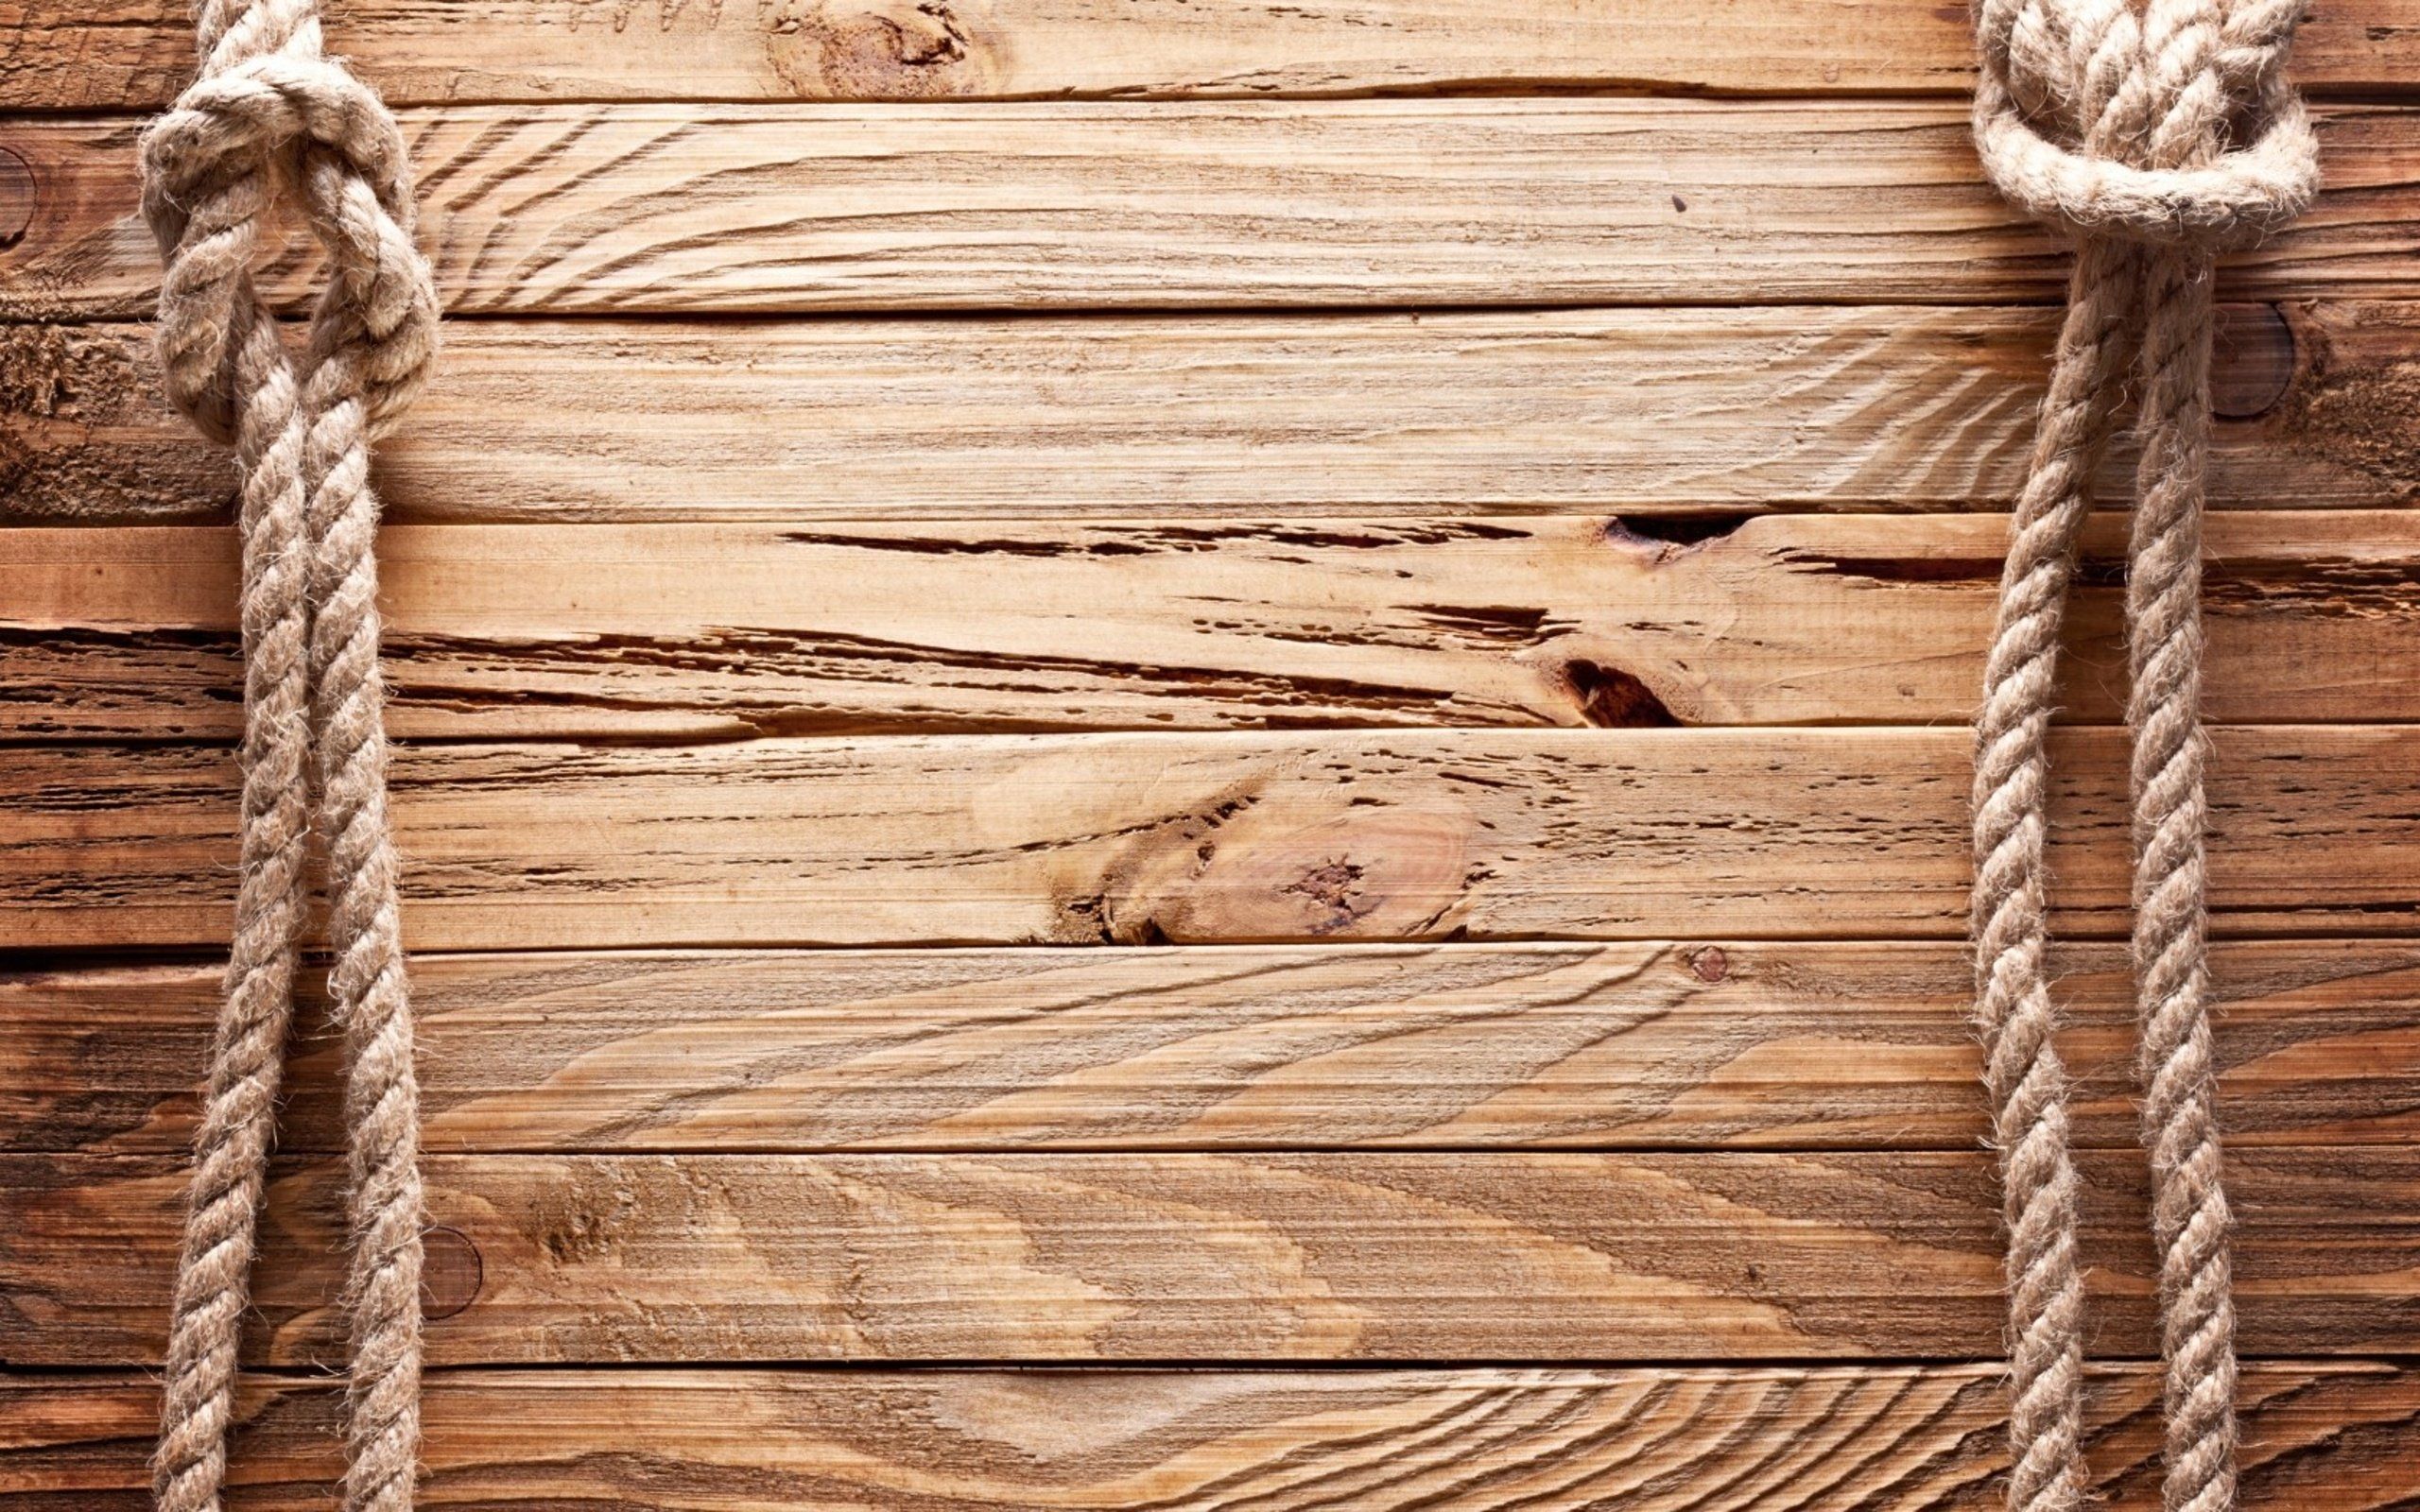 50 HD Wood Wallpapers For Free Download